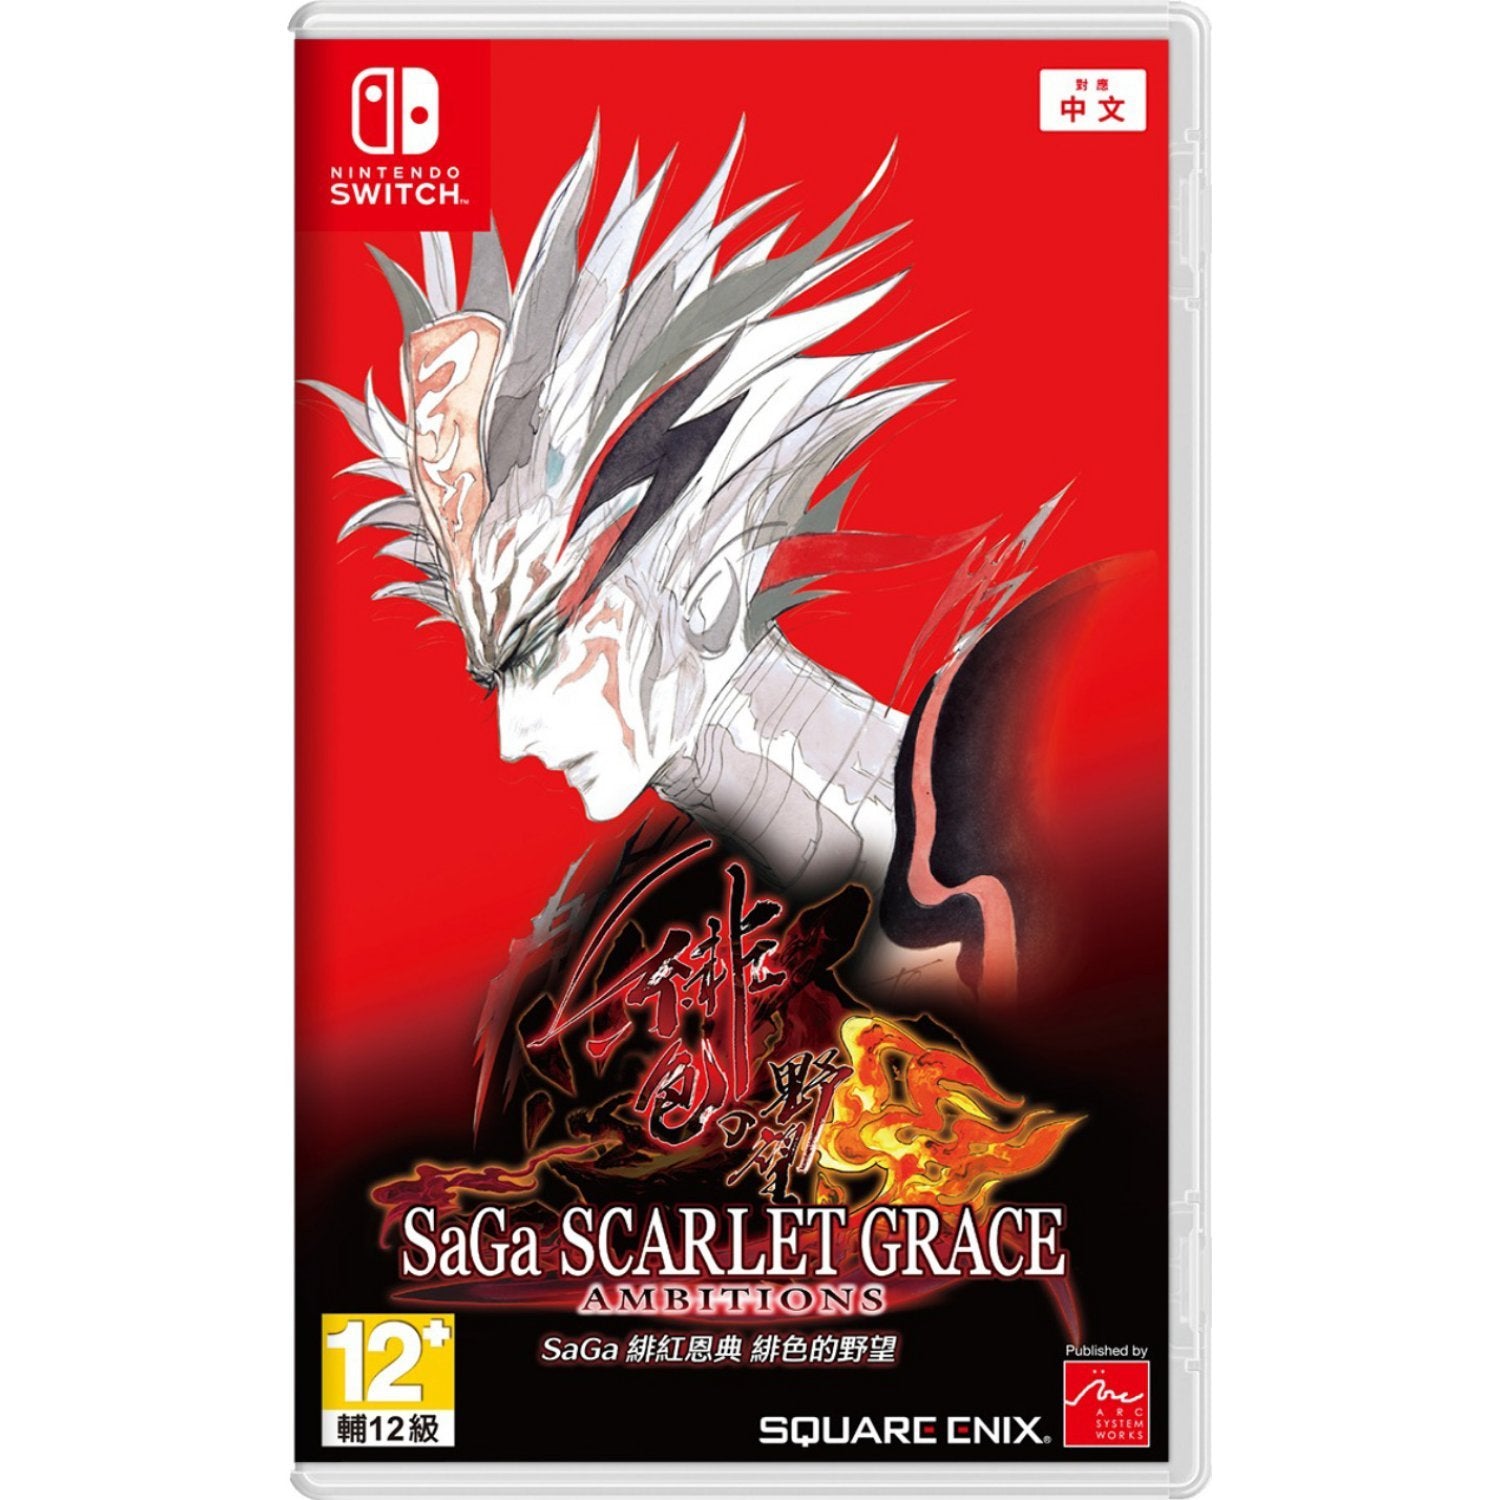 SaGa Scarlet Grace Ambitions (English & Chinese Subtitle) - (NSW) Nintendo Switch (Asia Import) Video Games Arc System Works   